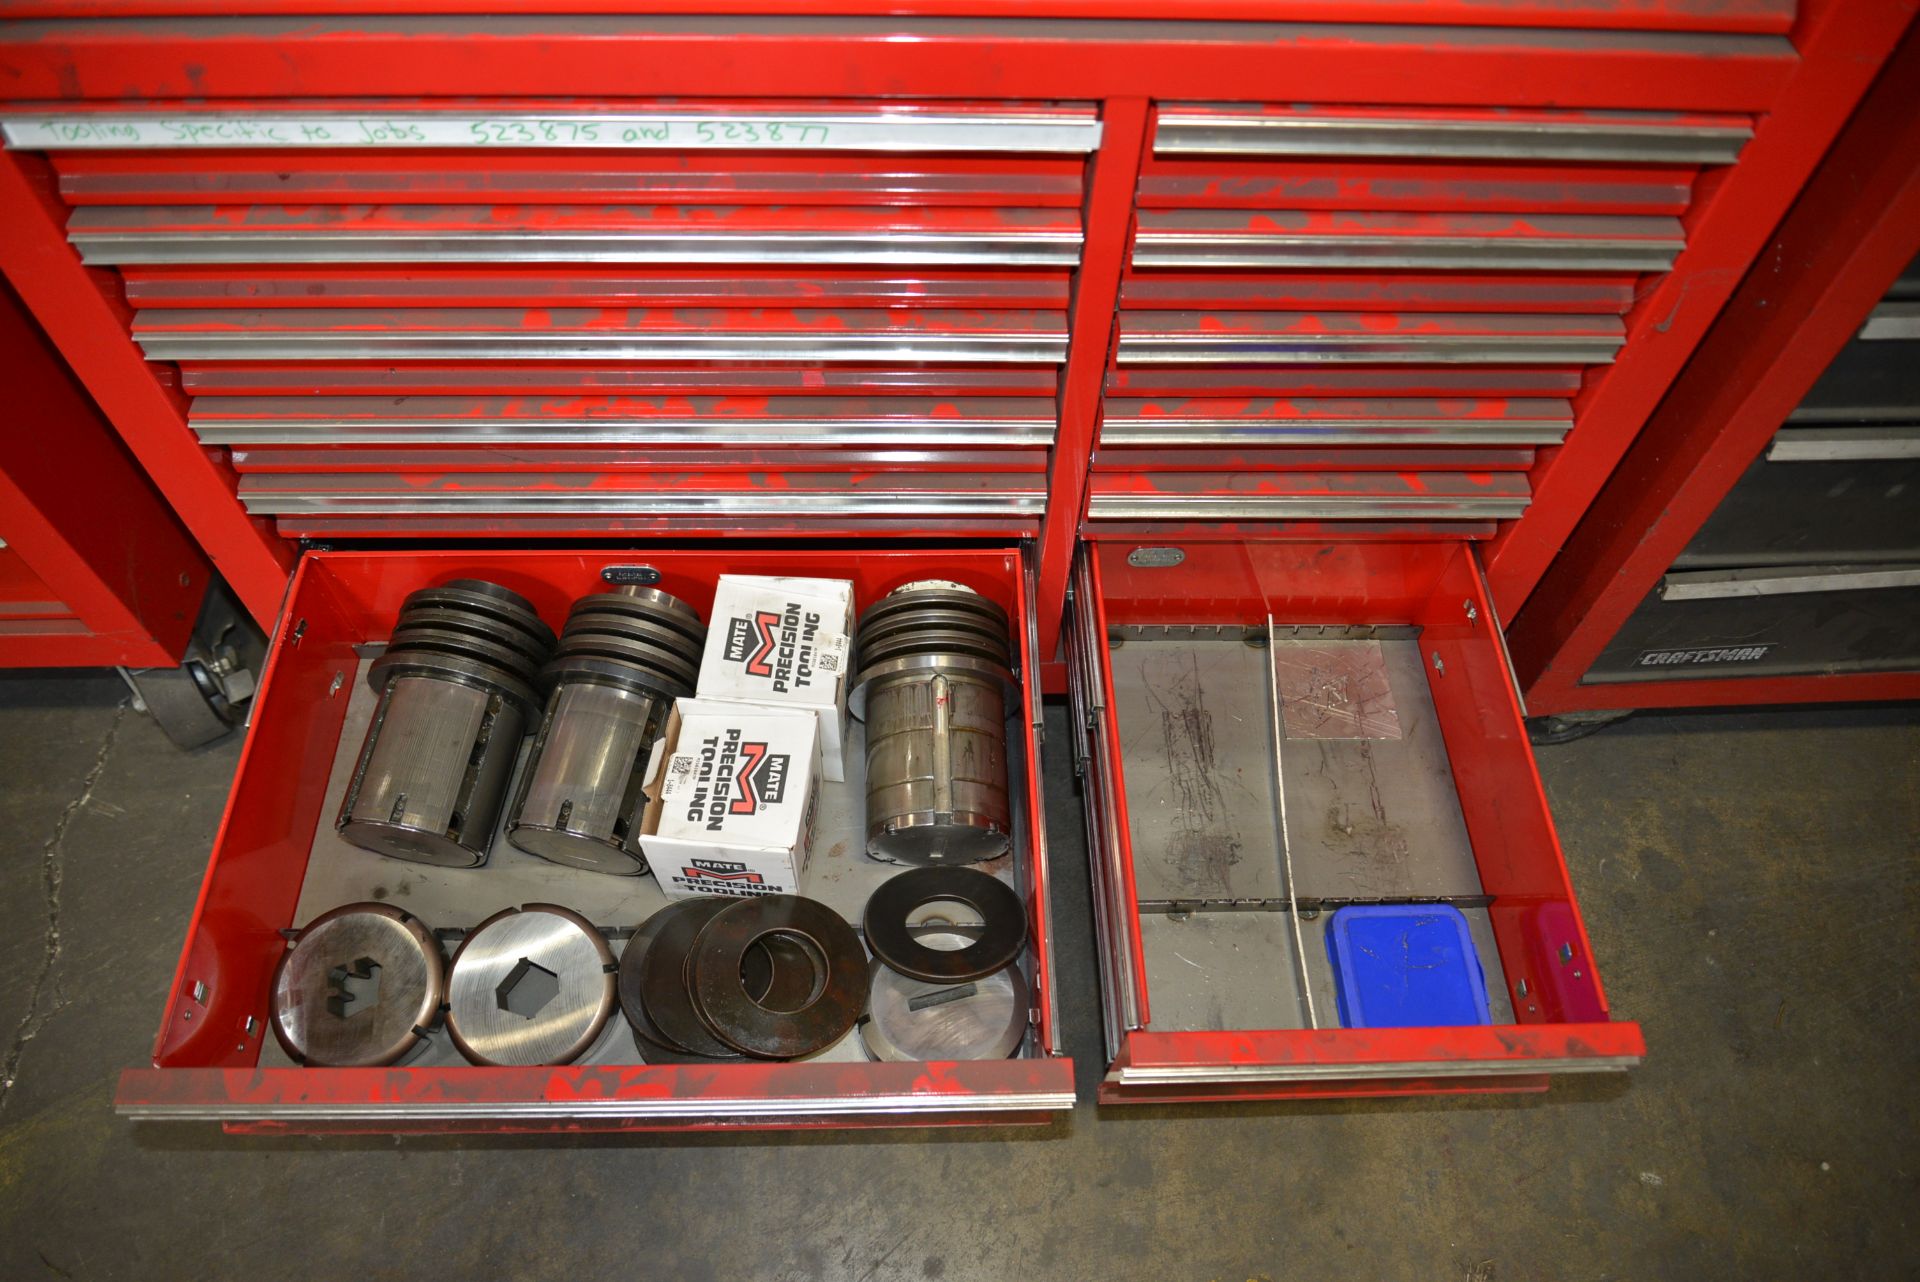 US GENERAL TOOL CHEST FULL OF AMADA TOOLING - Image 8 of 8